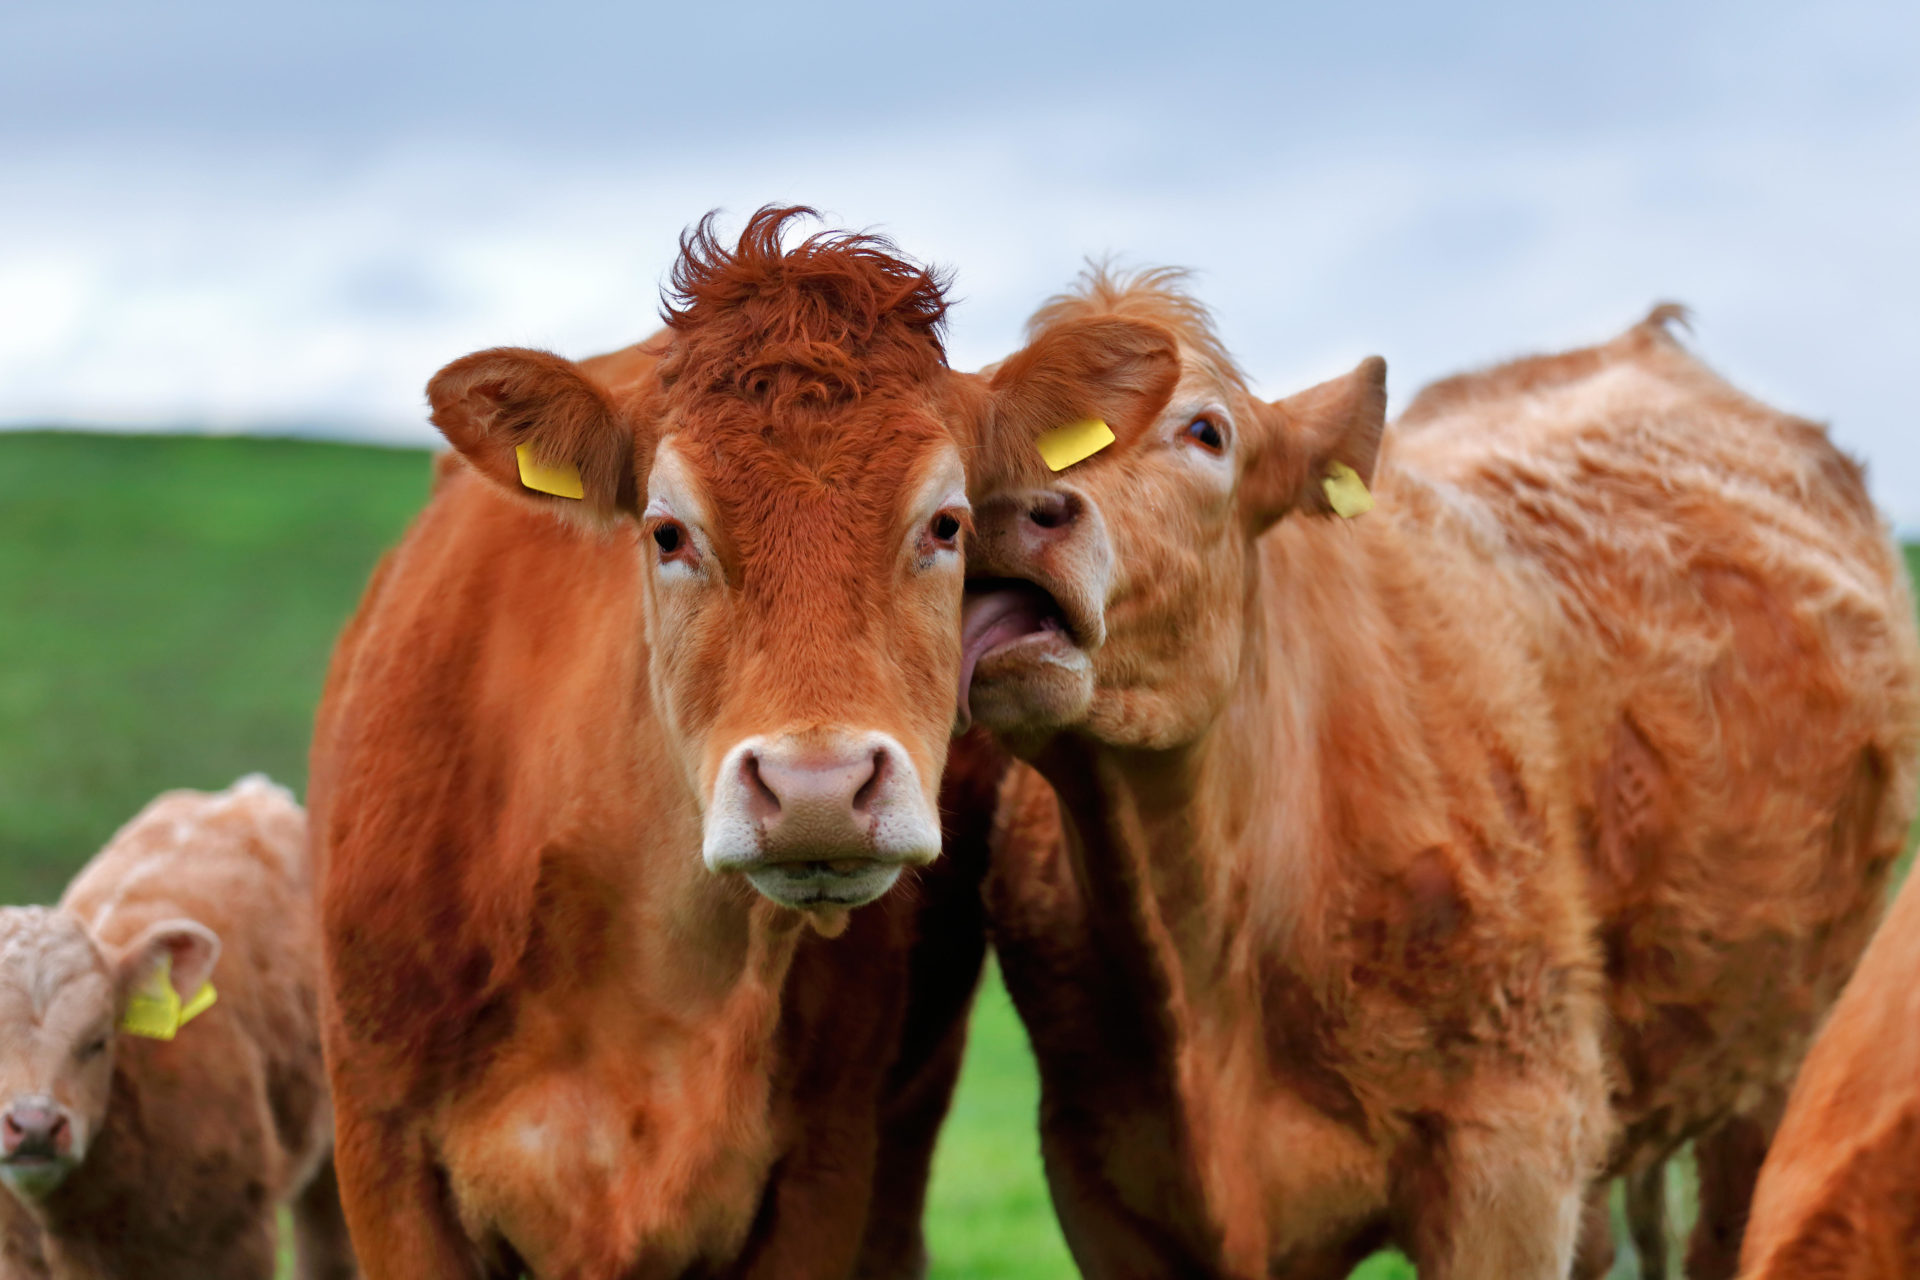 A herd of cows in the West of Ireland. Image: BartKowski / Alamy Stock Photo